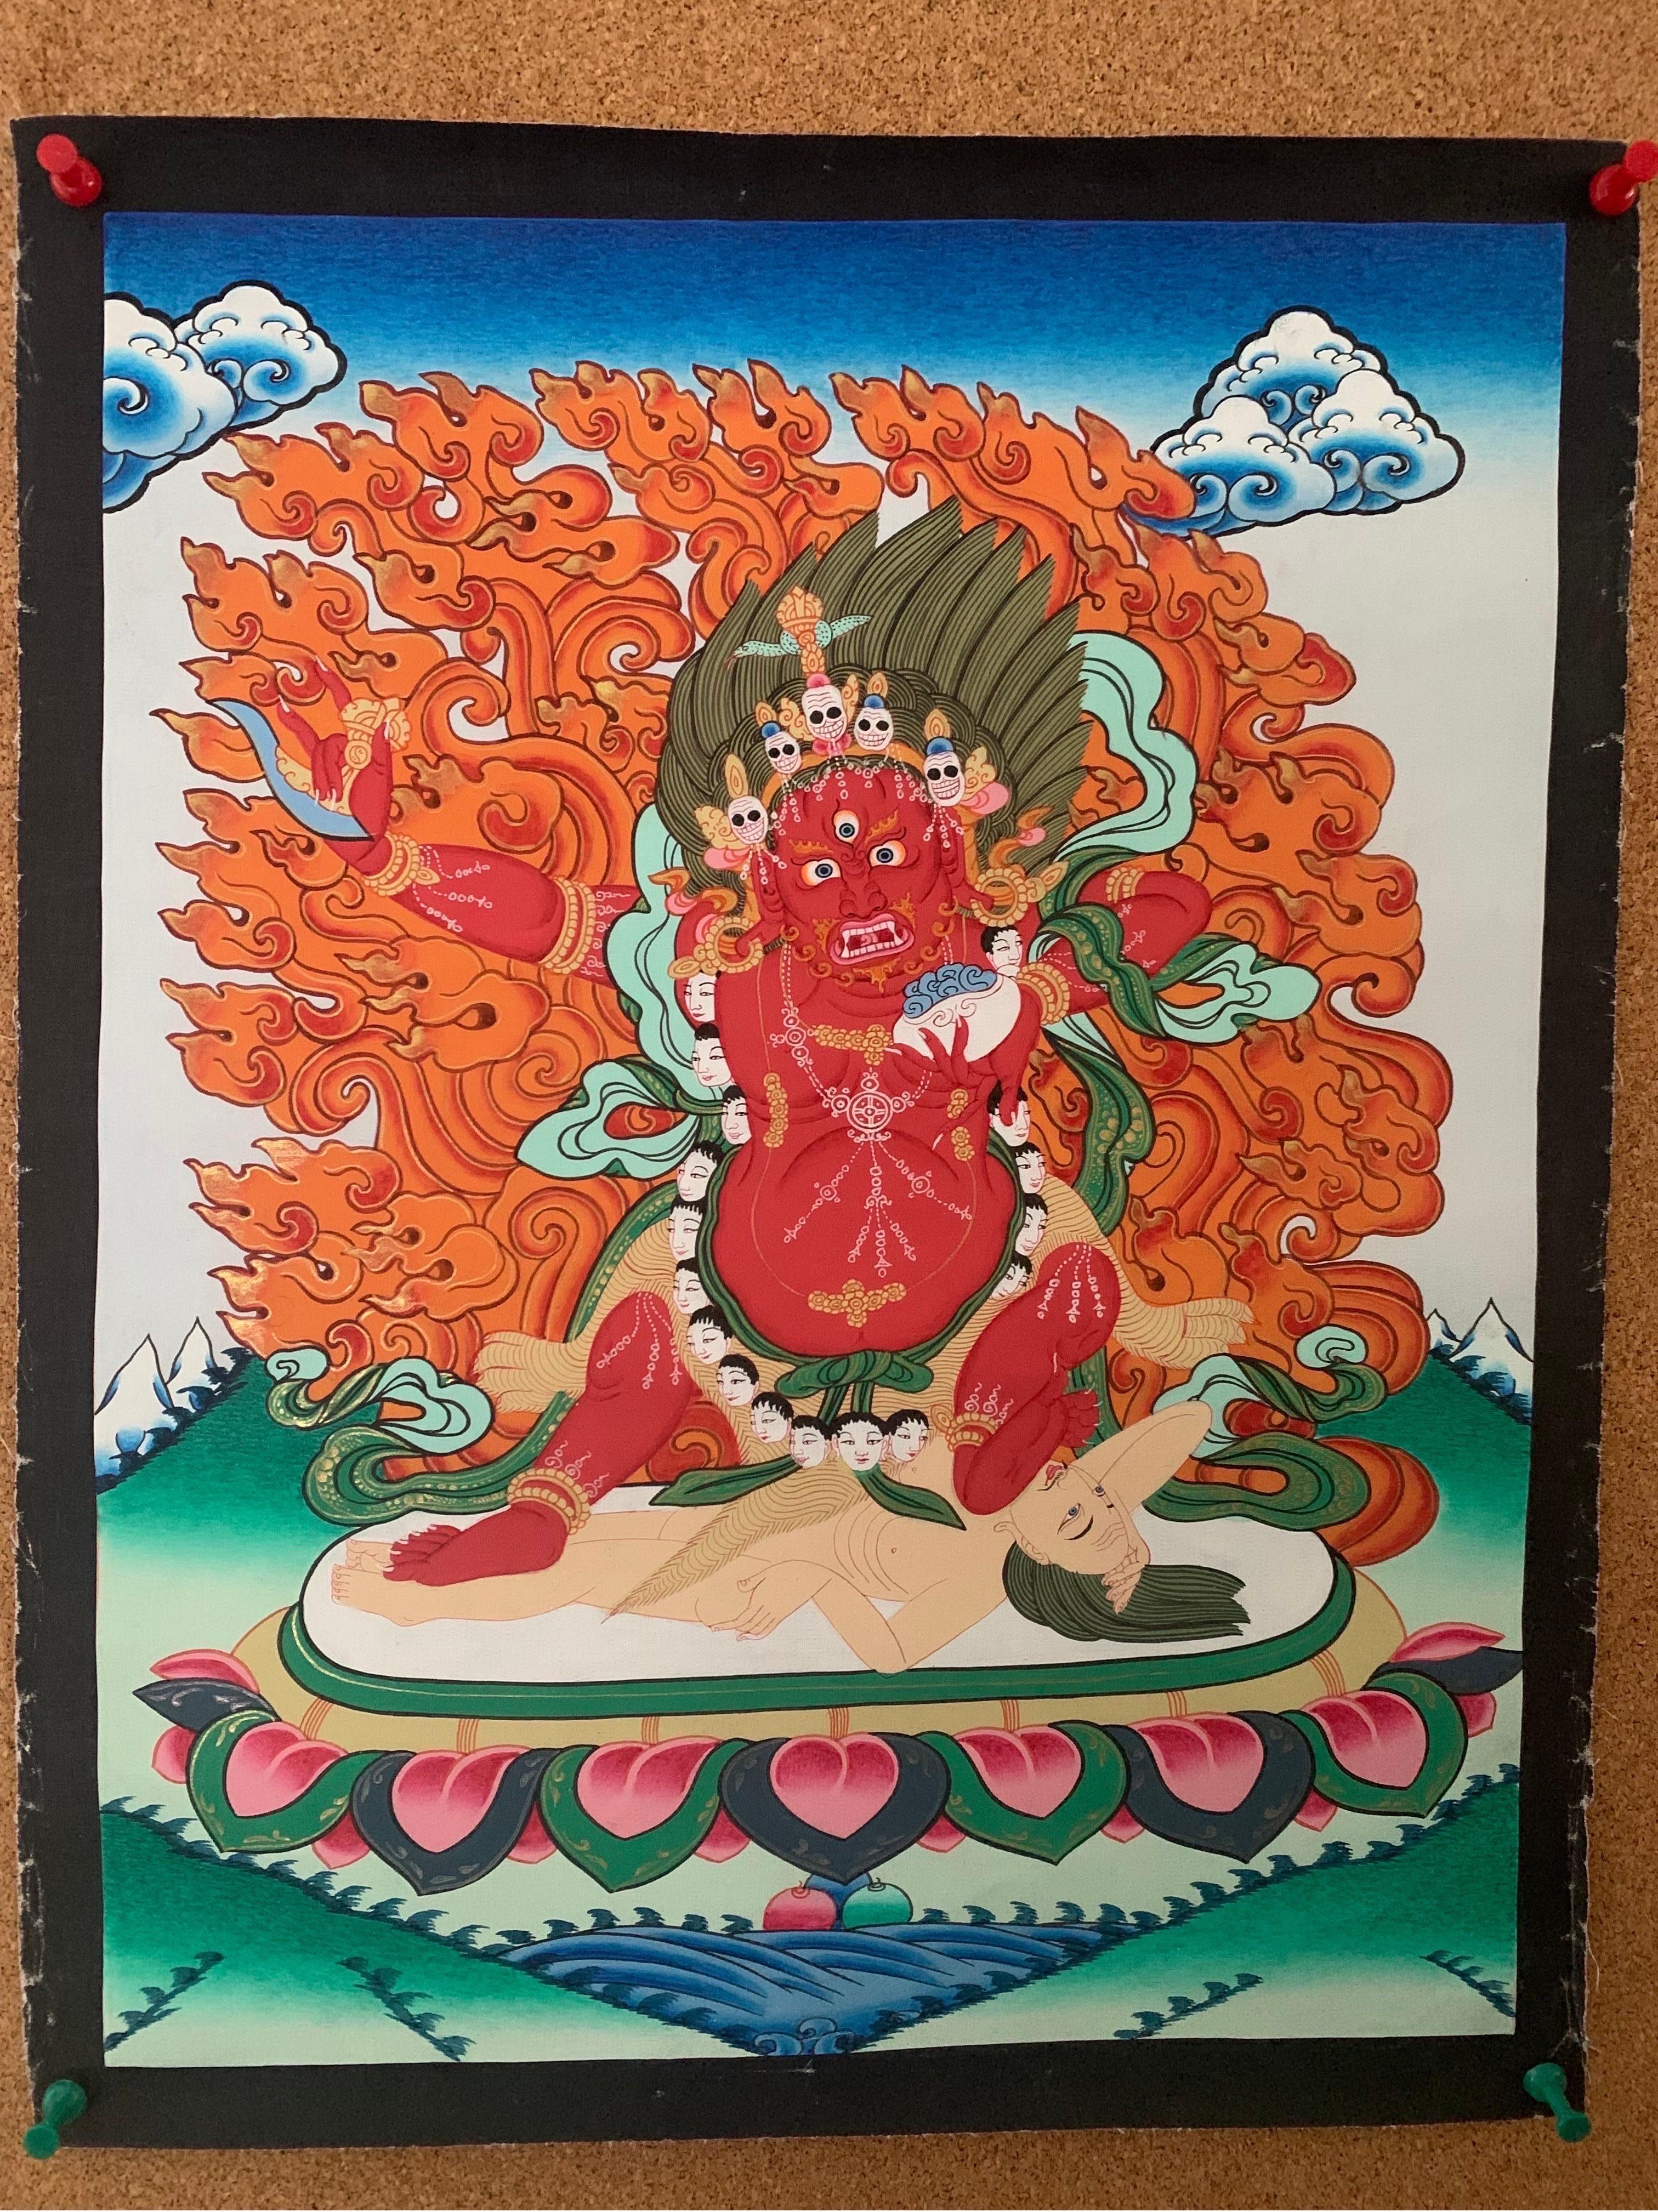 Unframed Hand Painted Vajrapani Thangka on Canvas with 24K Gold - Other Art Style Art by Unknown